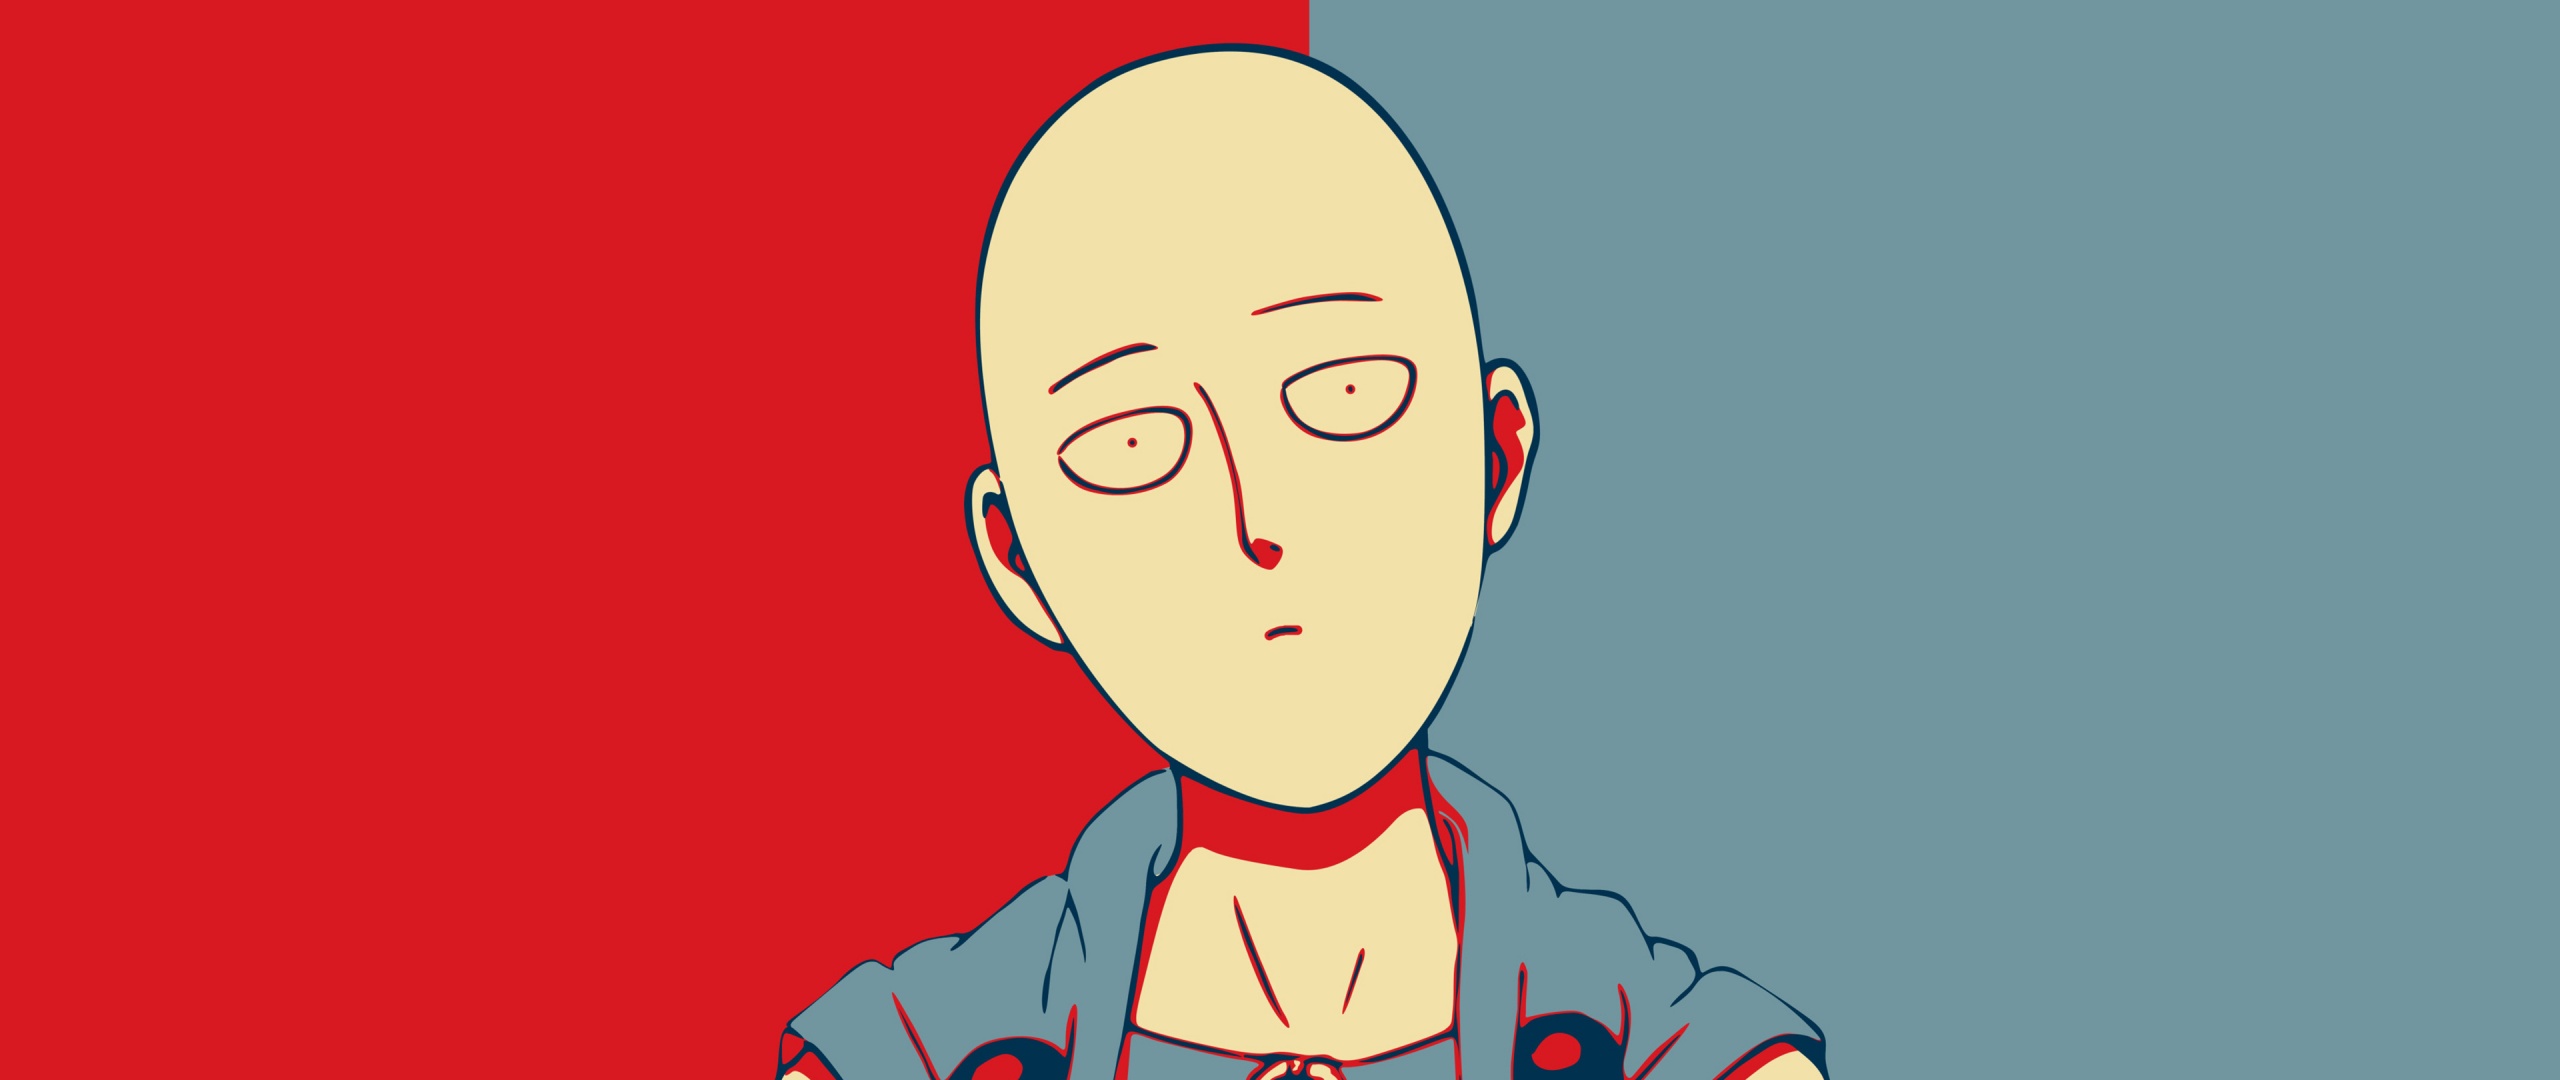 650 Anime One Punch Man Hd Wallpapers And Backgrounds 57 Off 2252